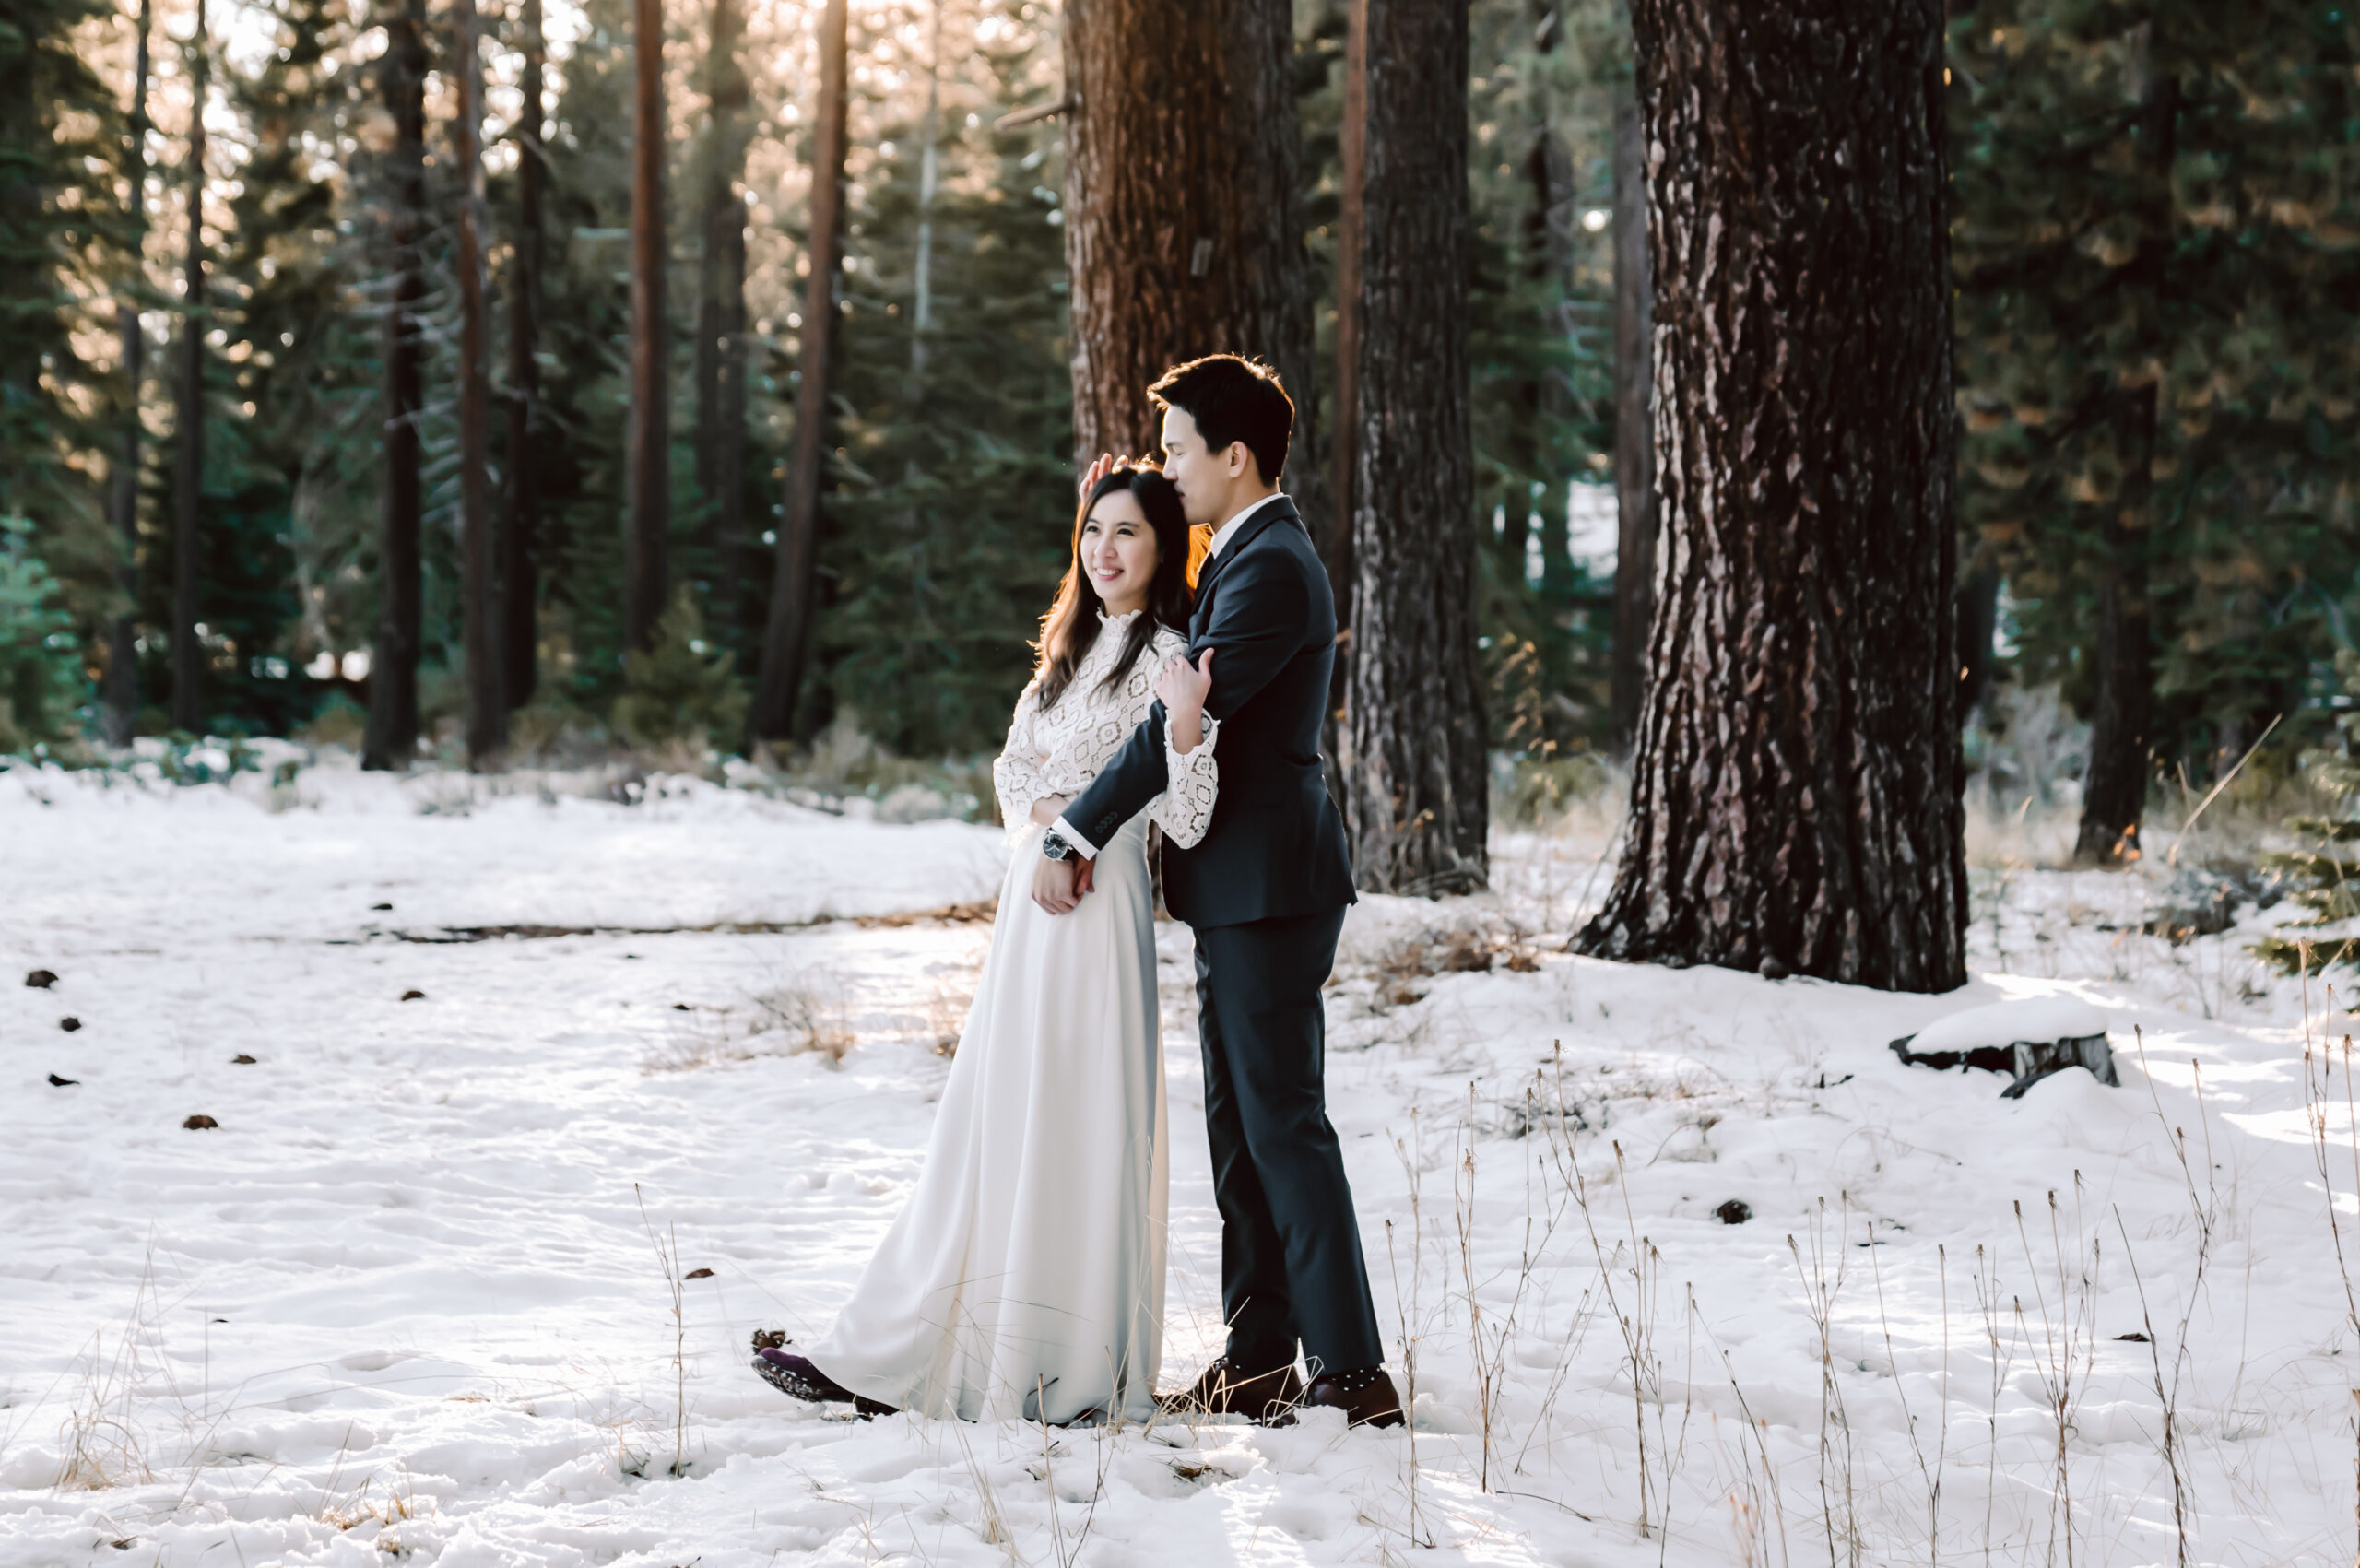 A bride and groom hugging and standing in the snow with the forest in the background for their elopement day in California